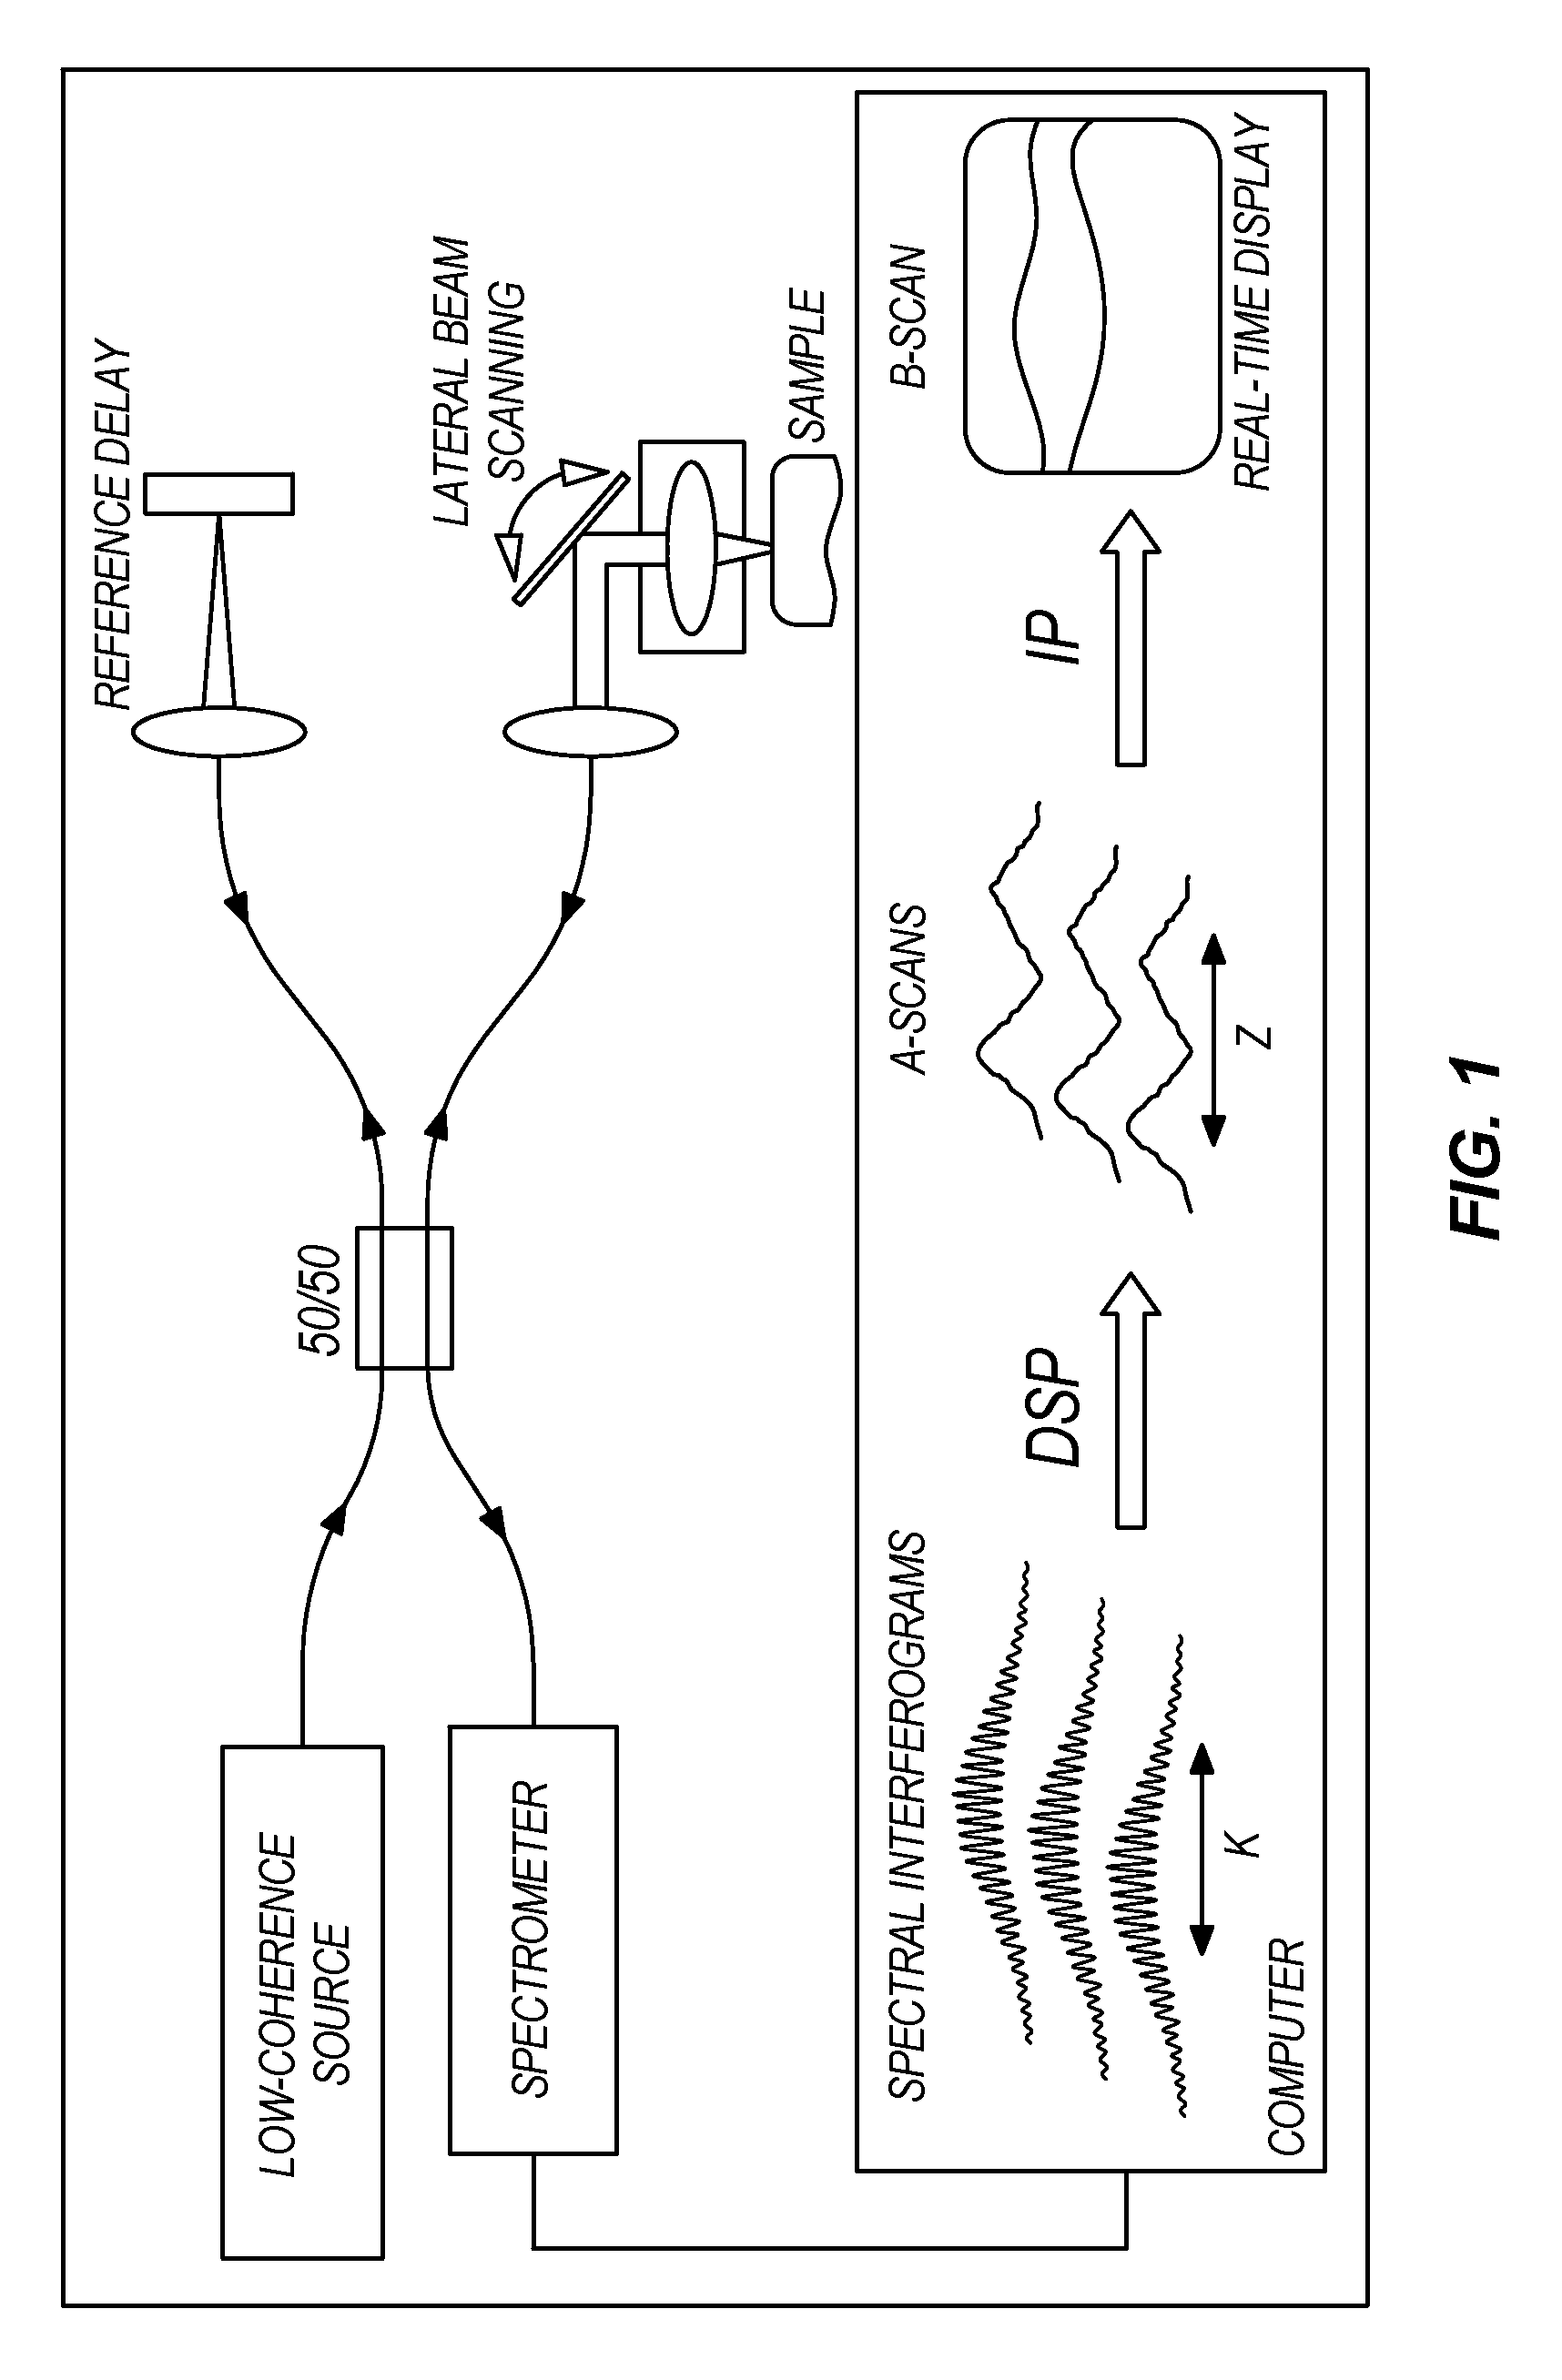 Apparatus and method for real-time imaging and monitoring of an electrosurgical procedure